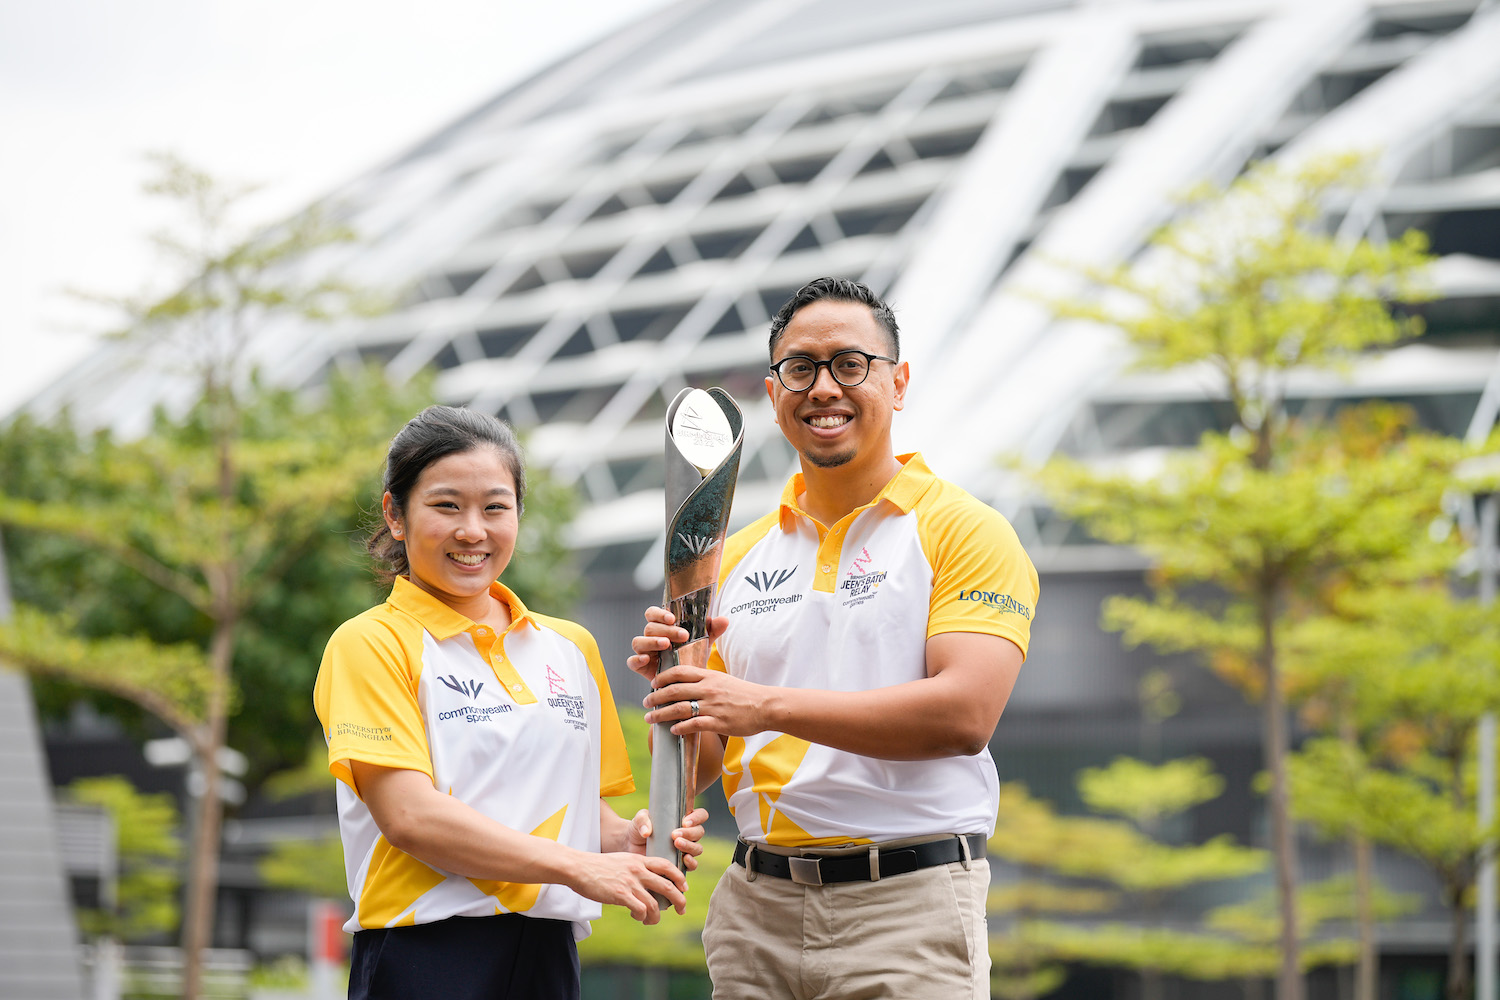 Former gymnast Lim Heem Wei appointed as Chef de Mission, to lead TeamSG at the 2022 Commonwealth Games!